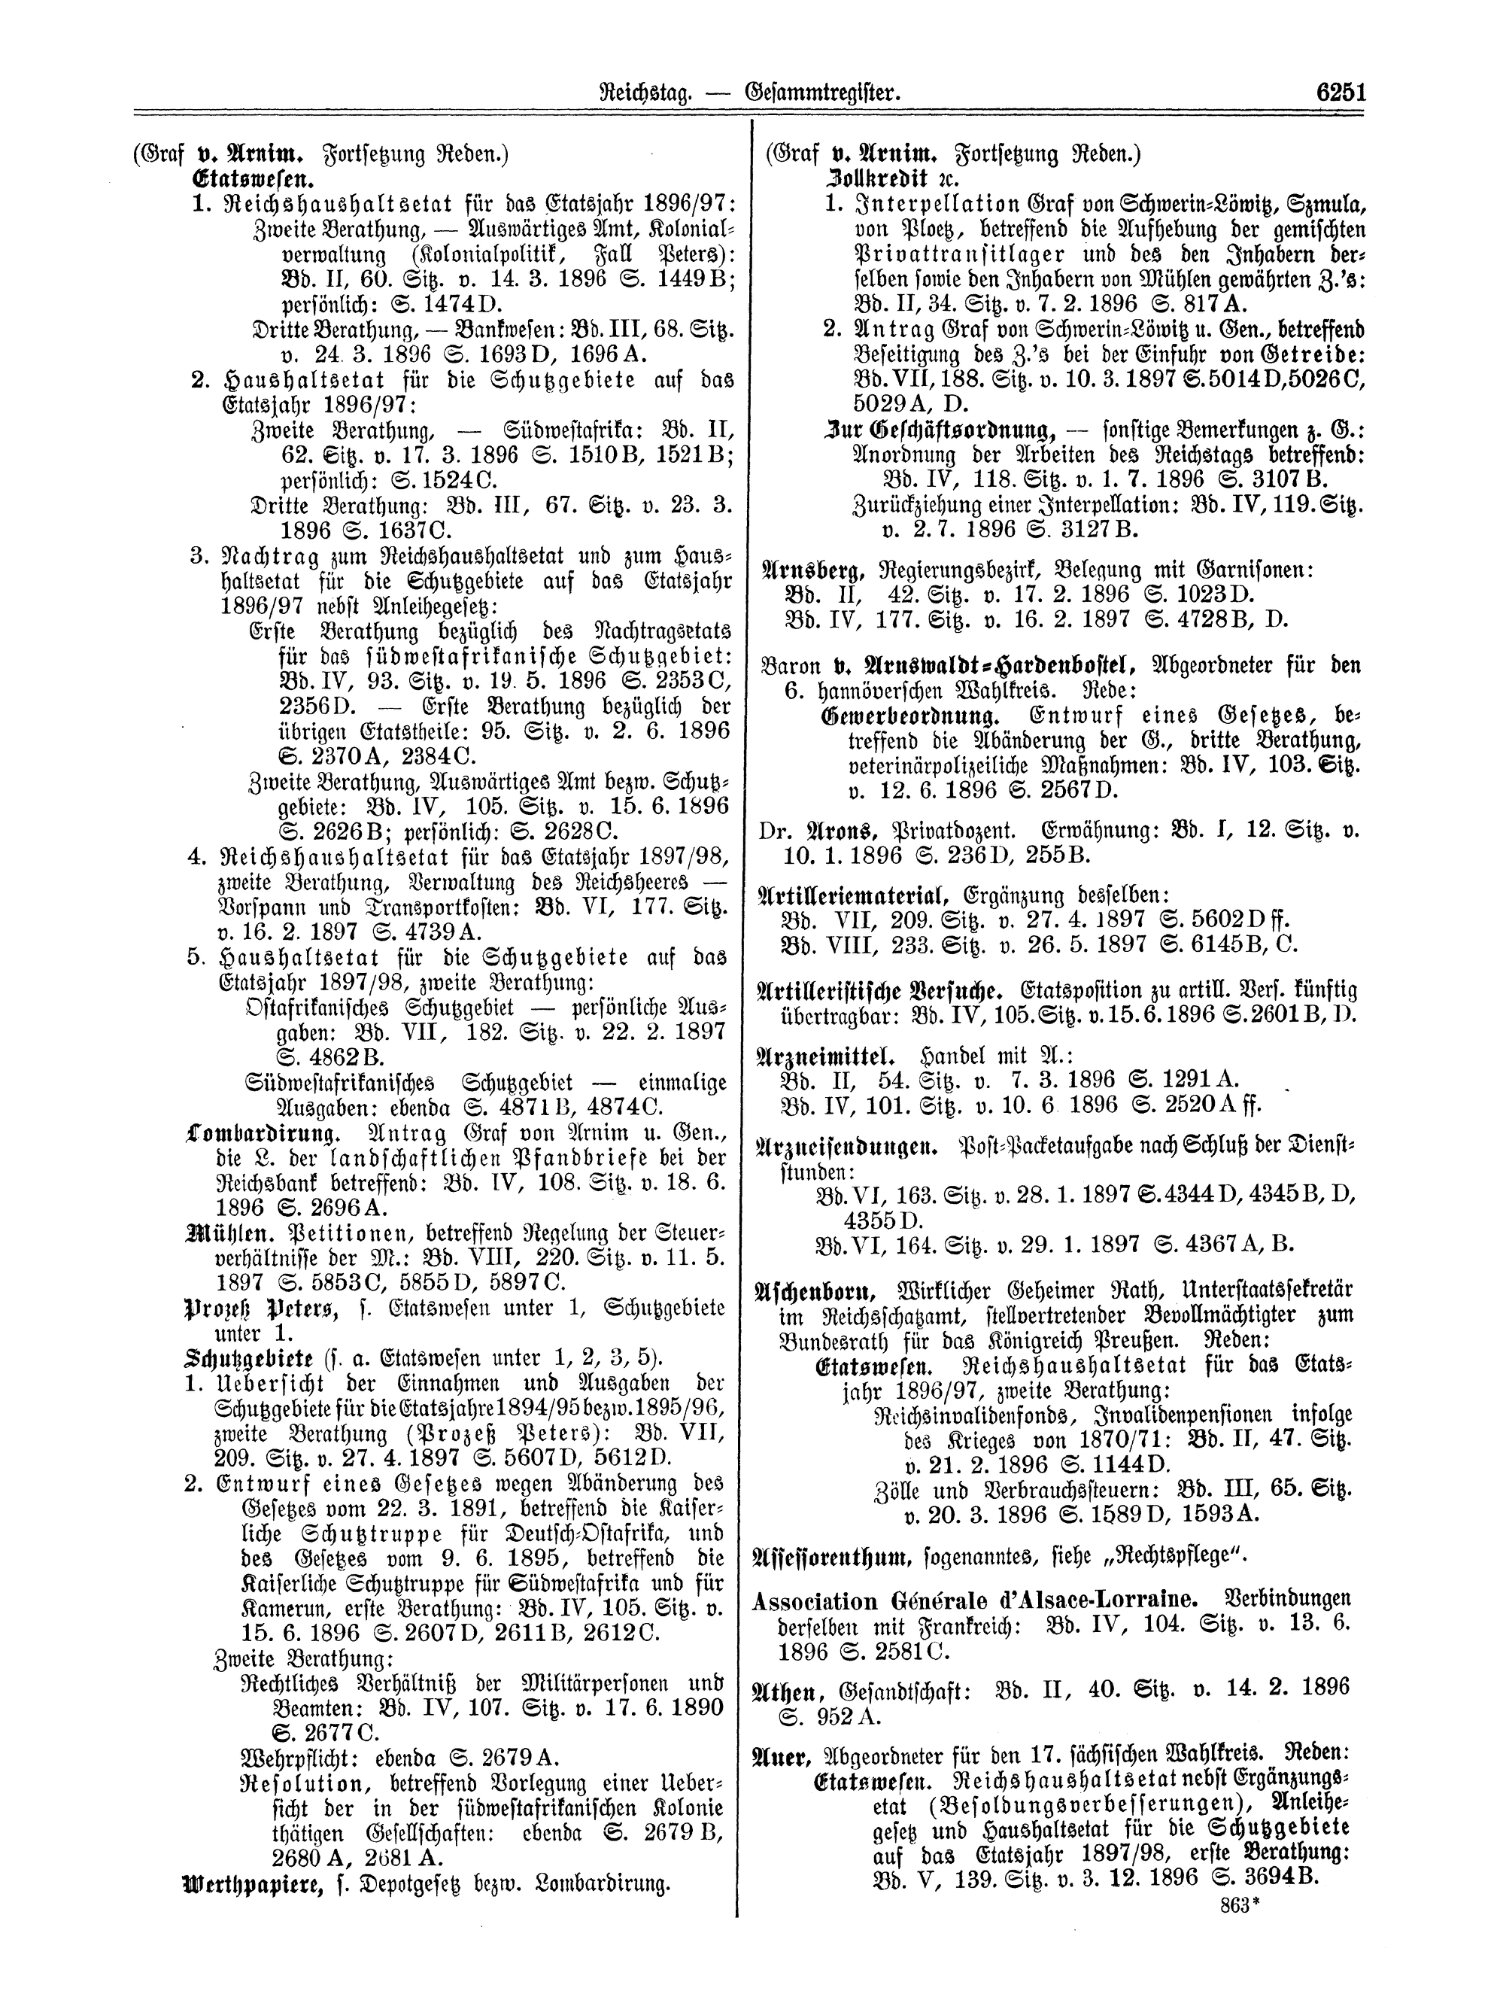 Scan of page 6251